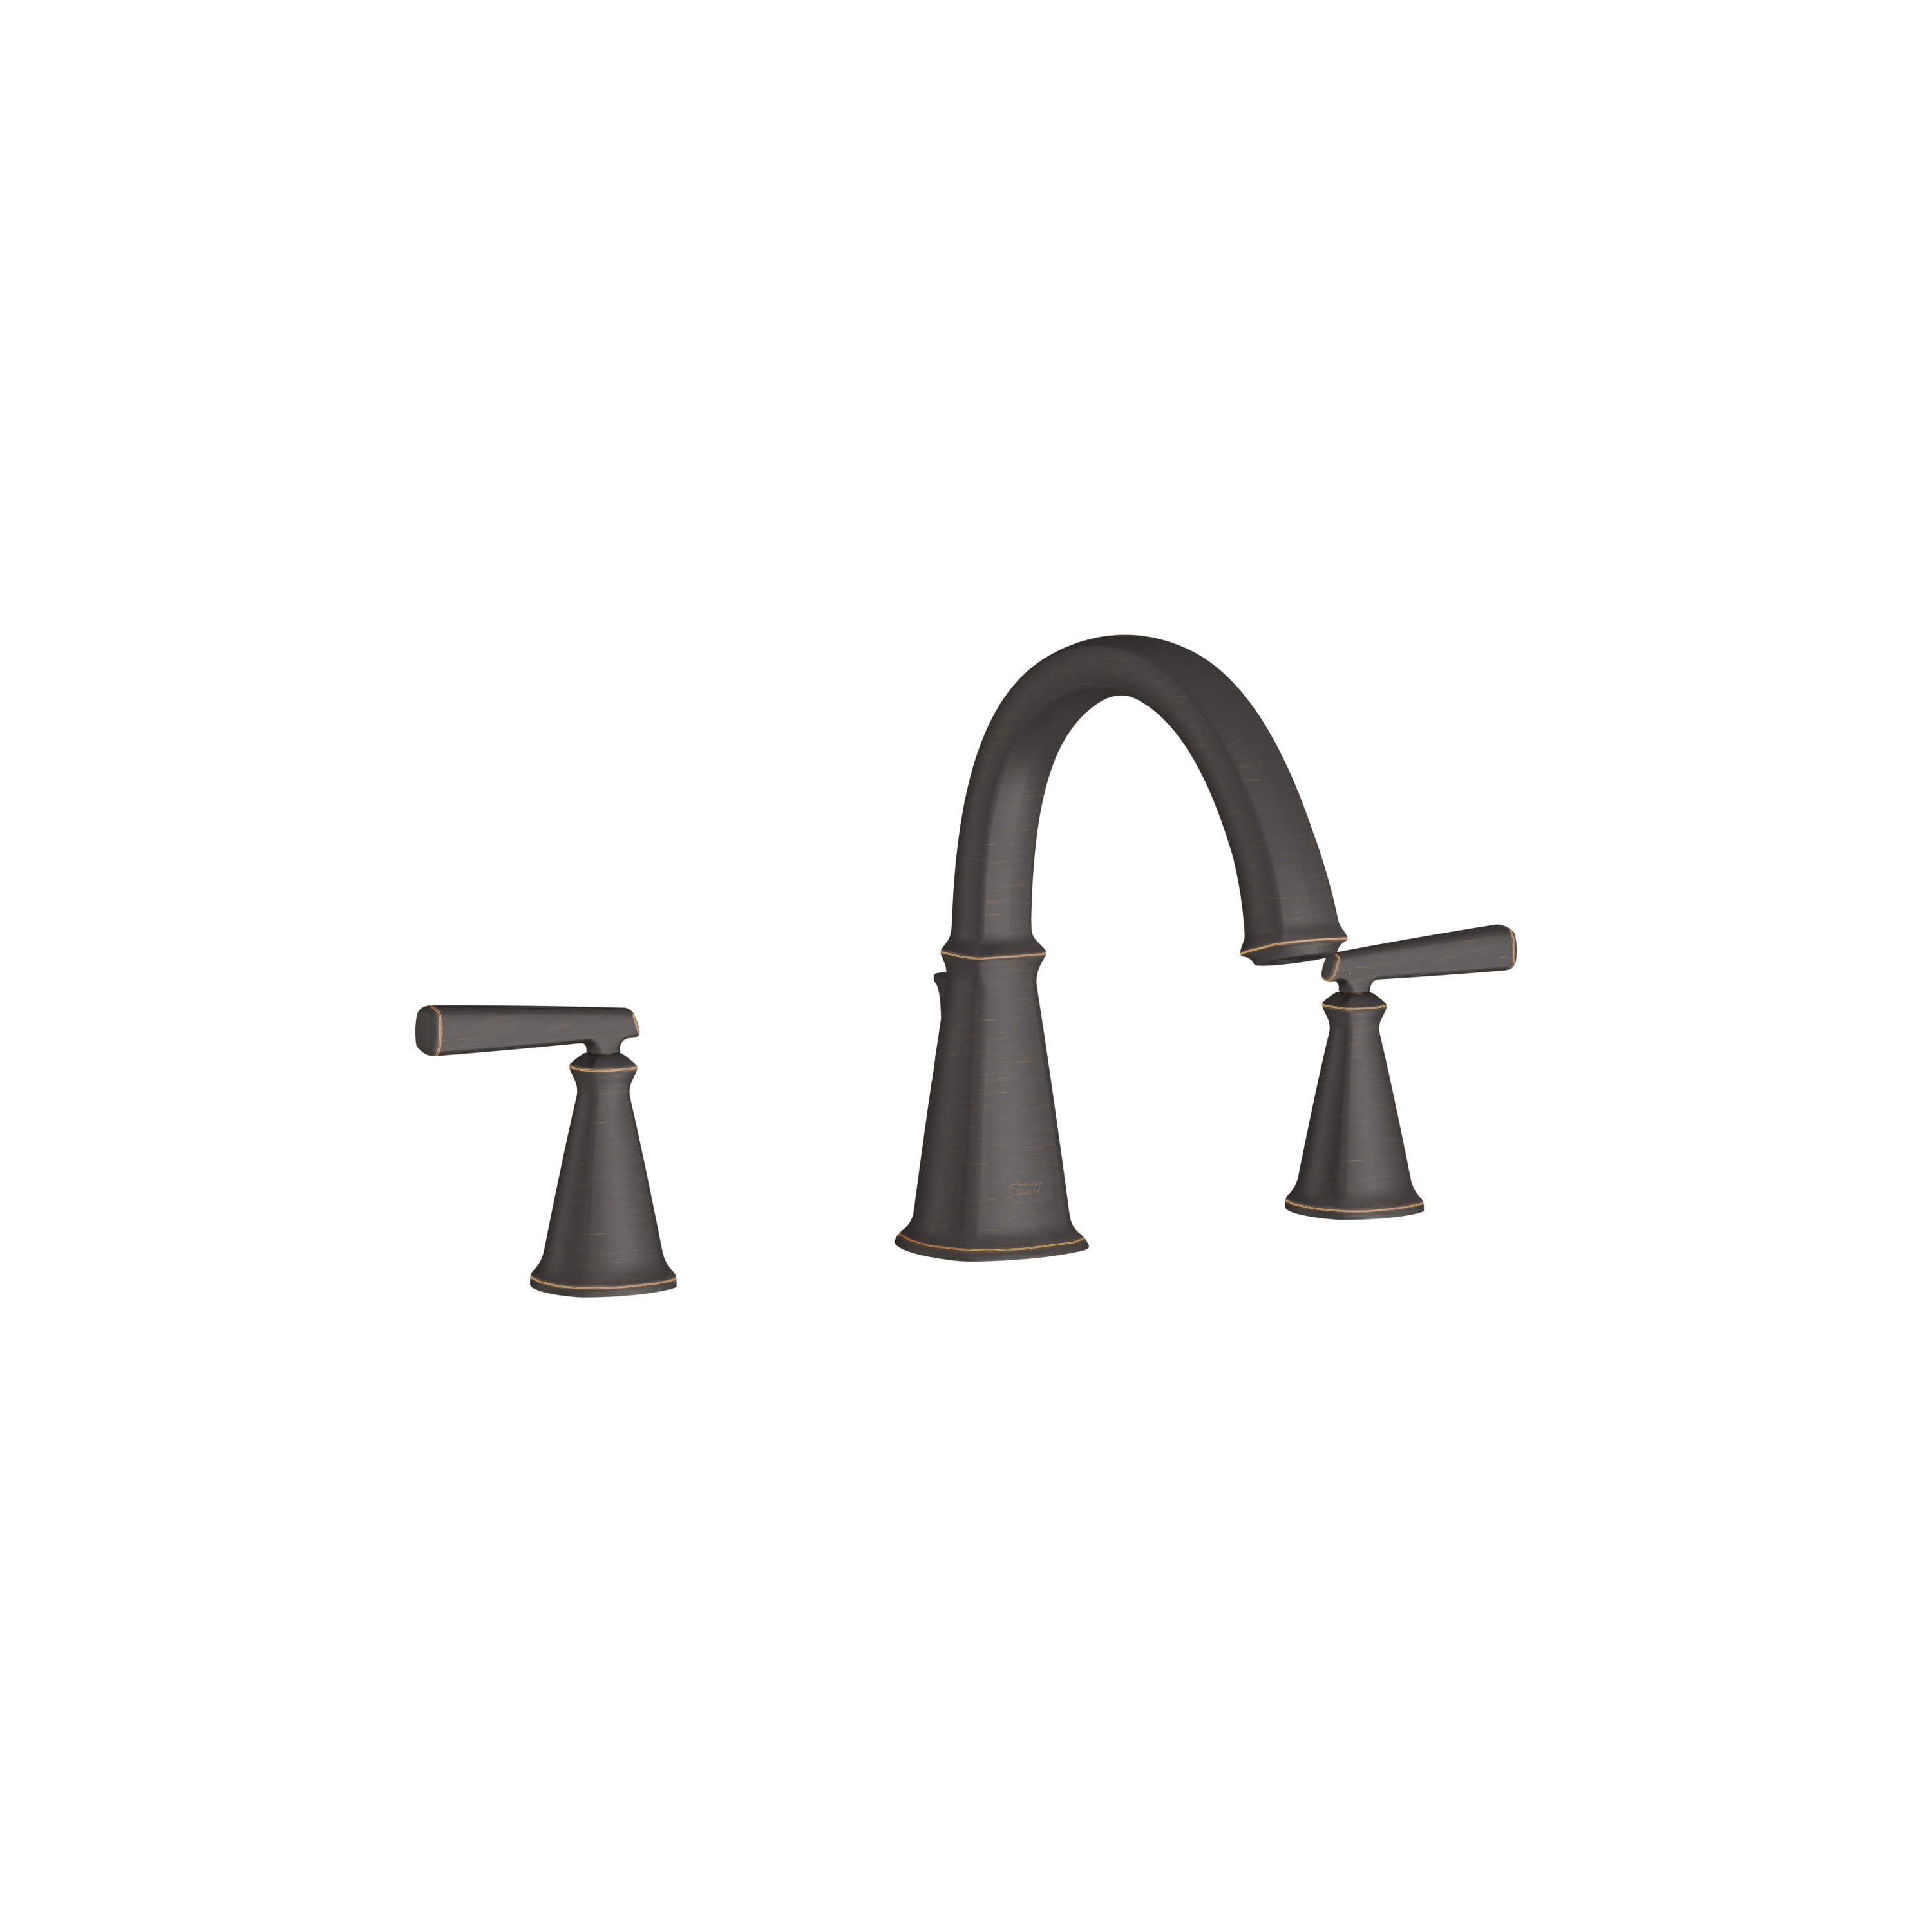 Edgemere Bathtub Faucet With Lever Handles for Flash Rough In Valve LEGACY BRONZE